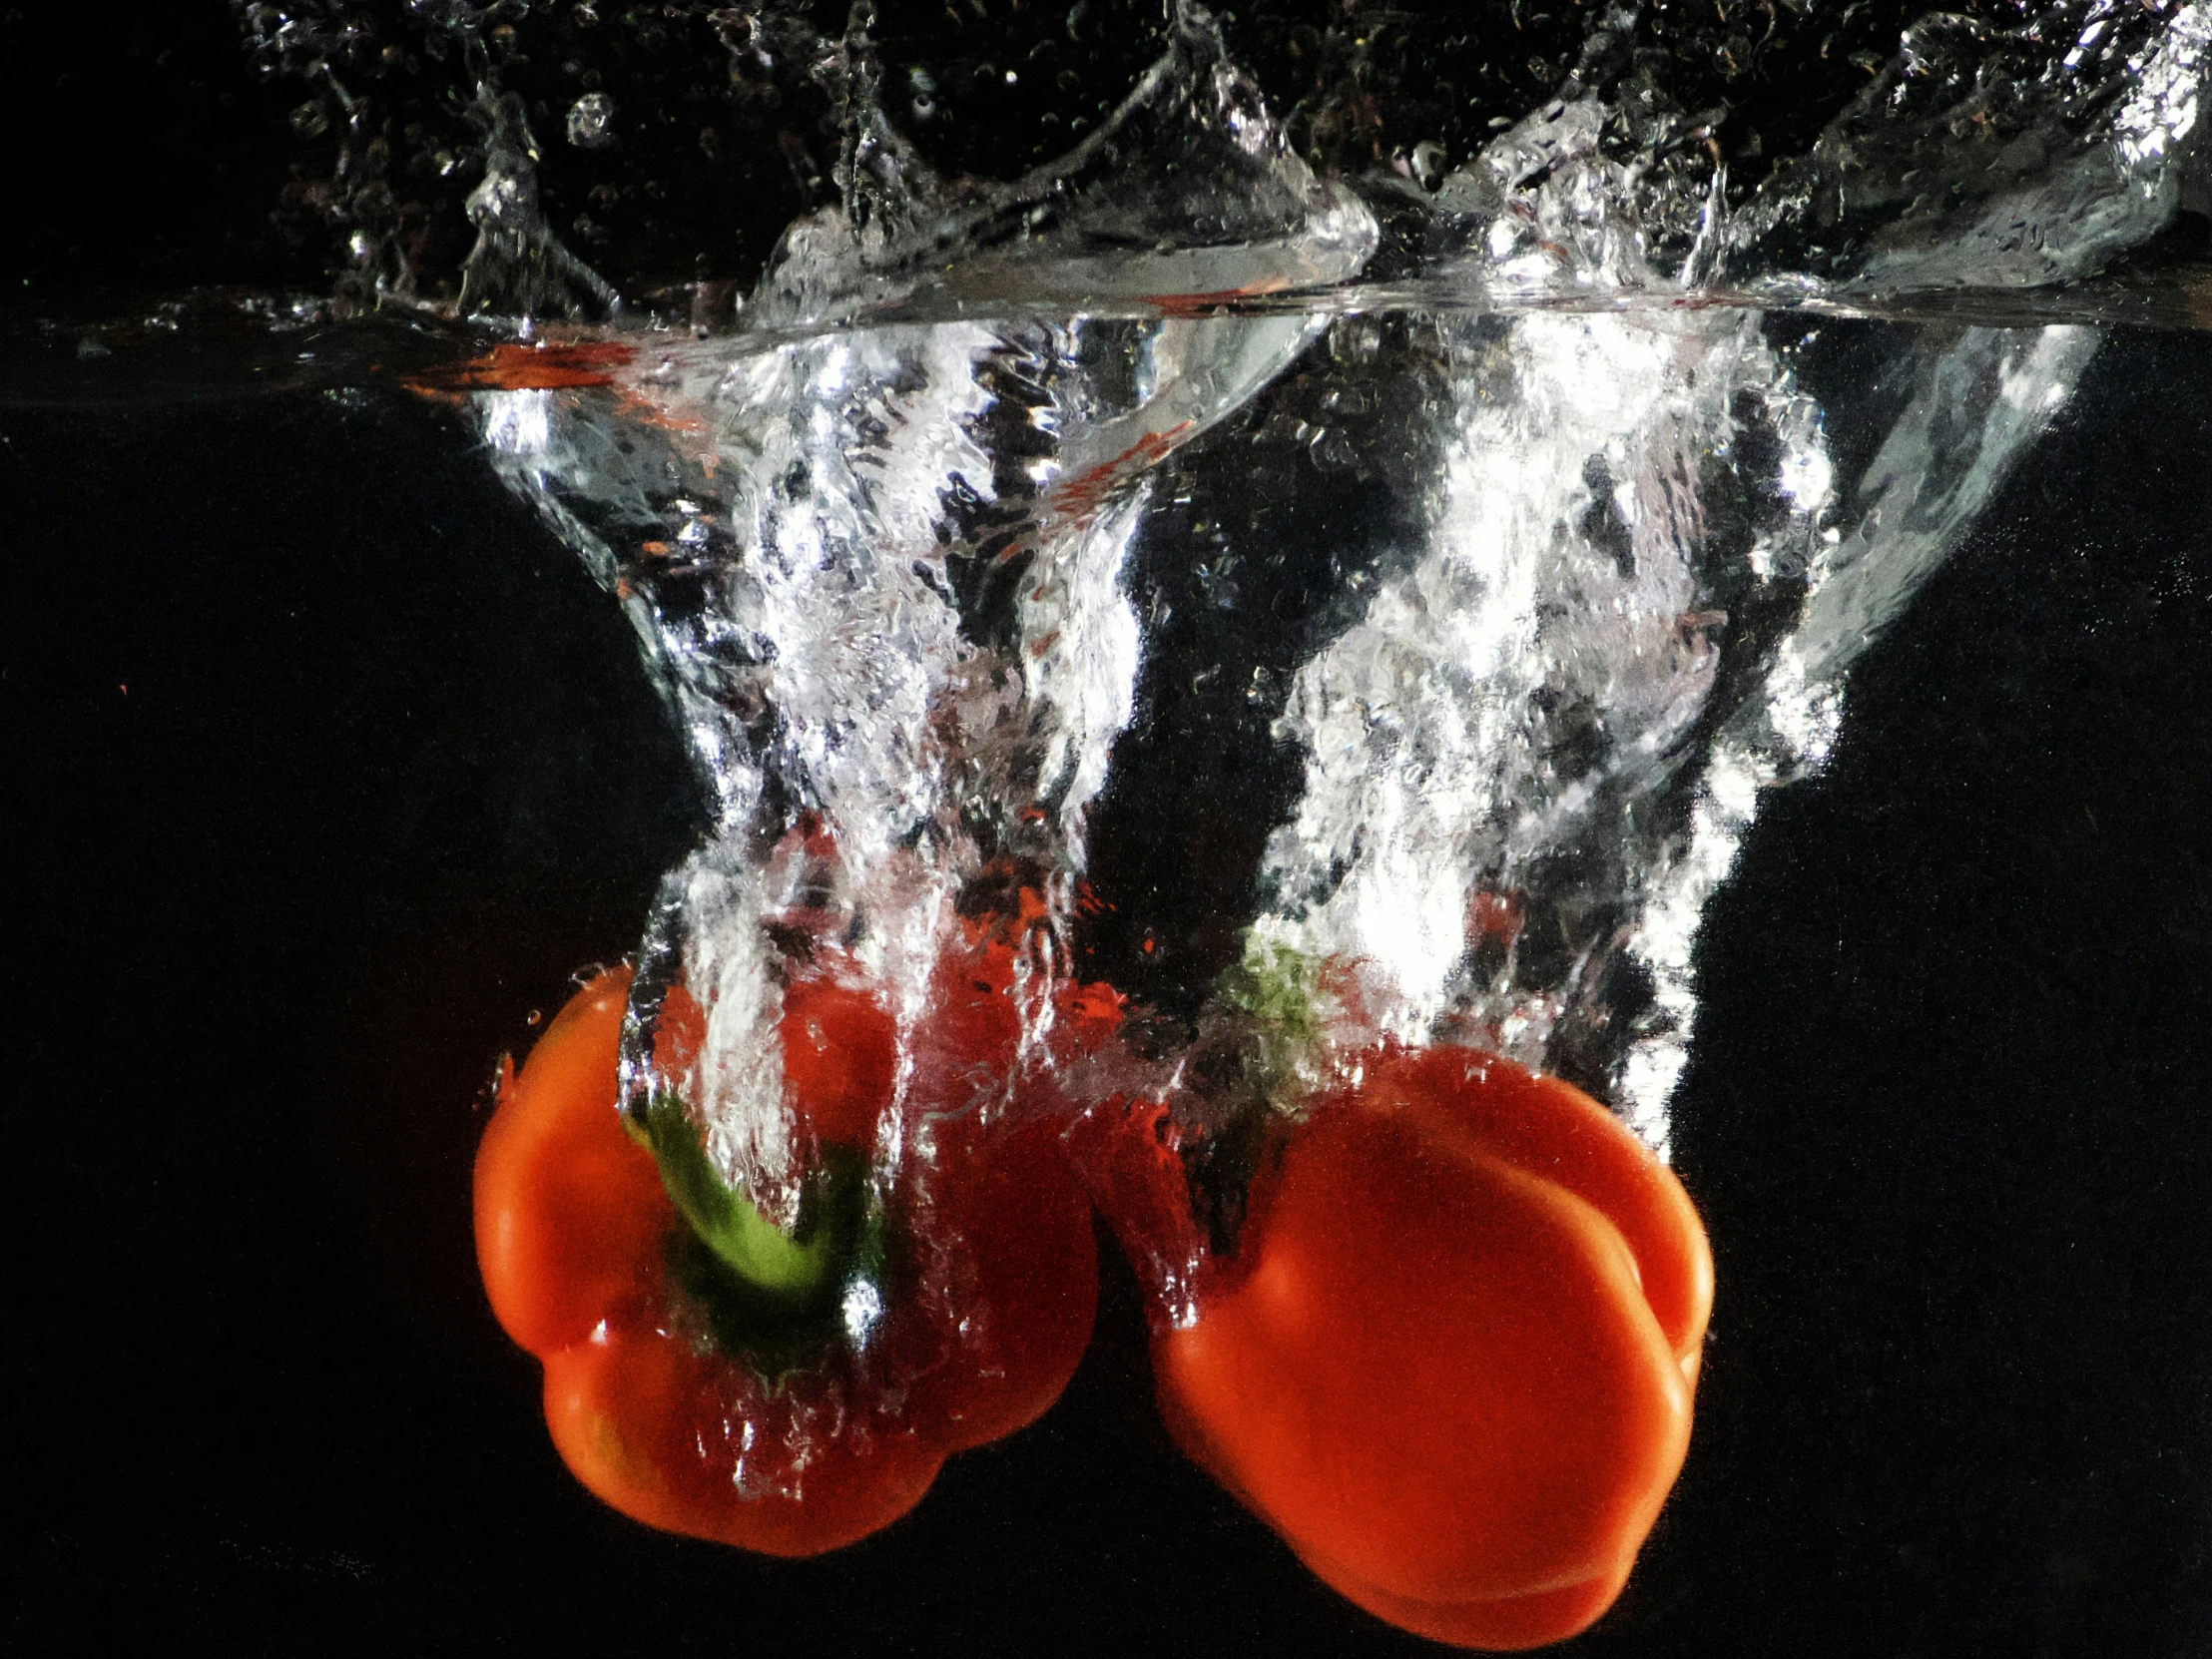 two oranges are in the water with splashes